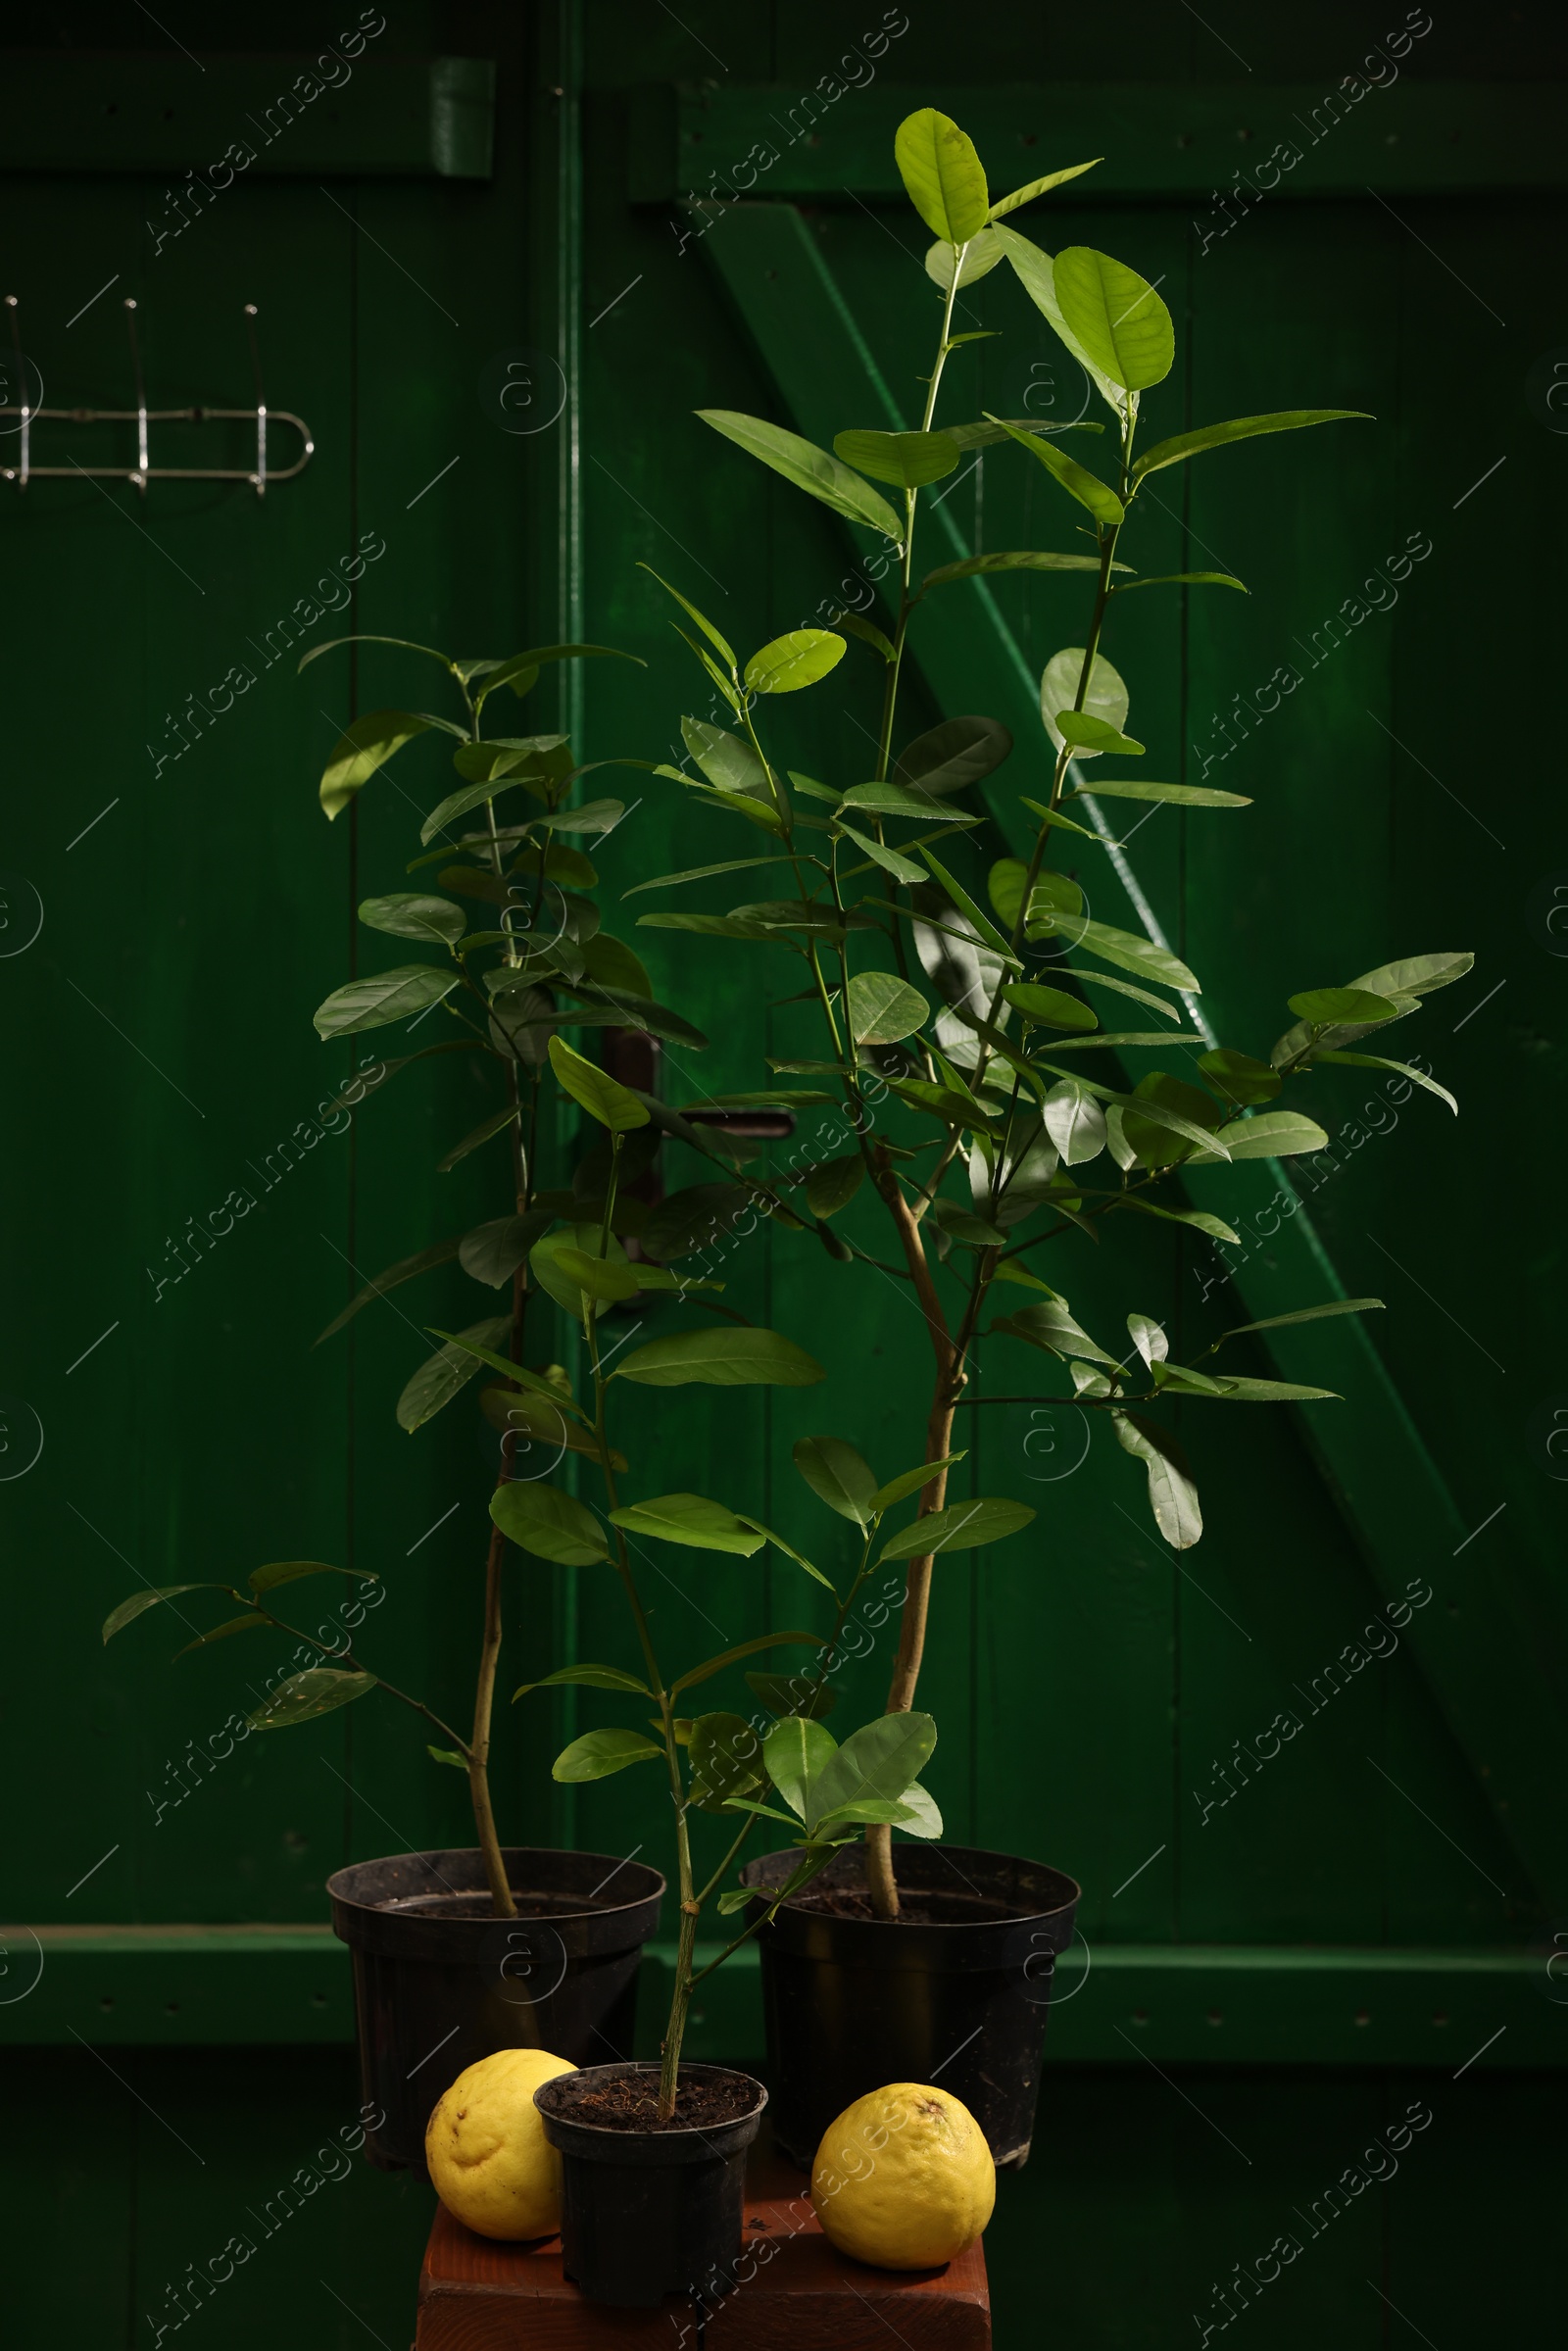 Photo of Lemon trees with ripe fruits on wooden stand in greenhouse